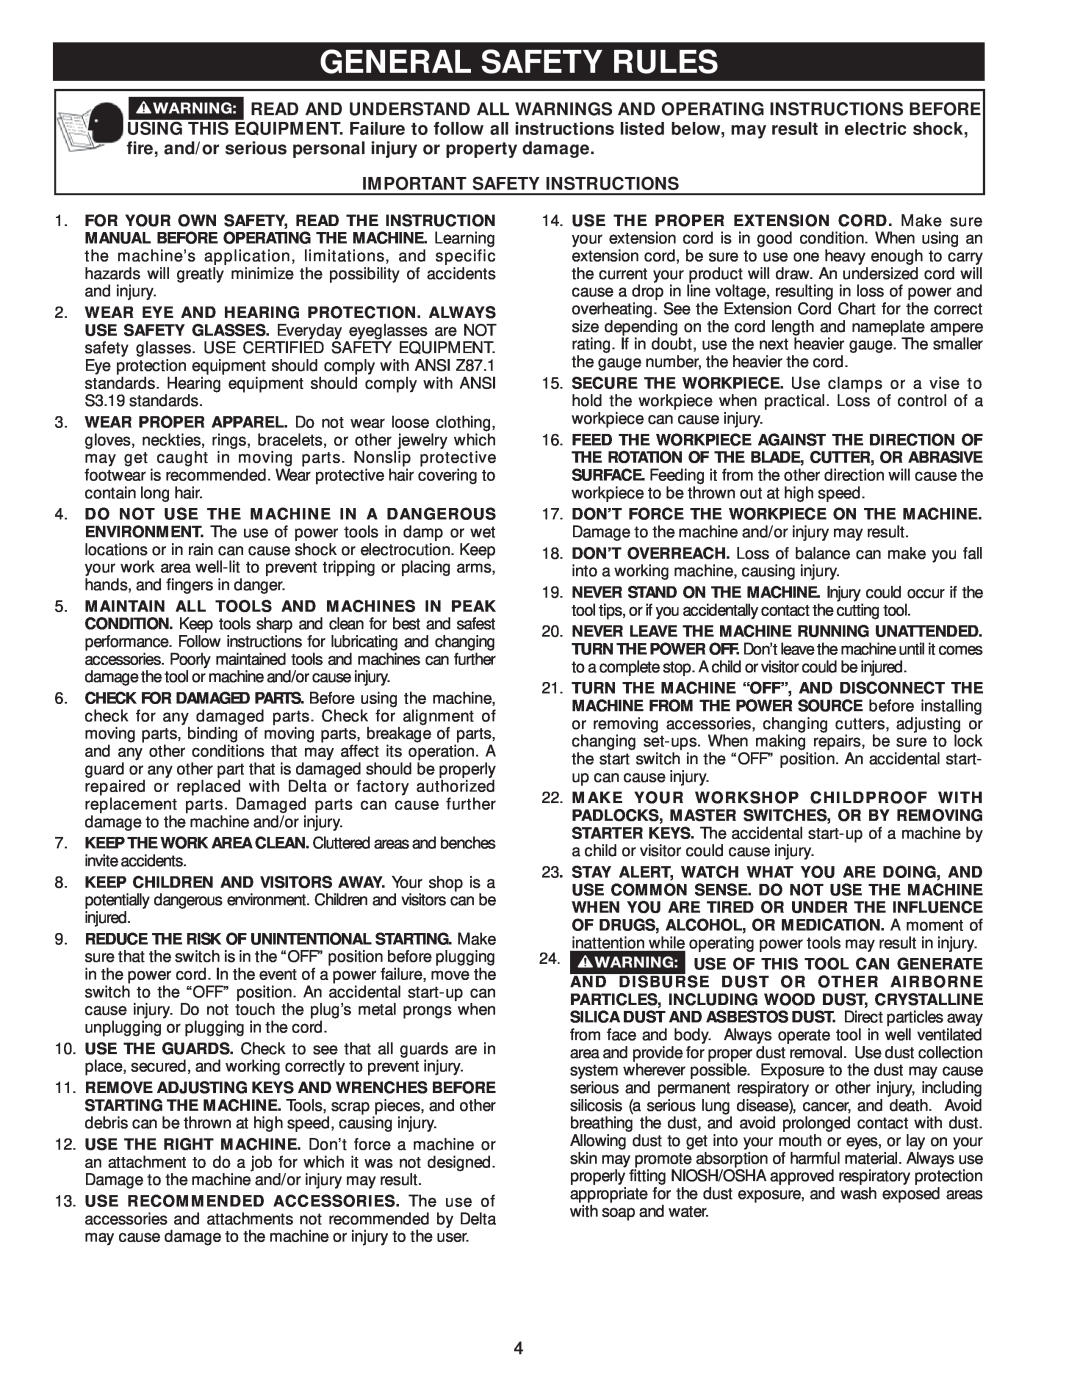 Delta 36-979, 36-978 instruction manual General Safety Rules, Important Safety Instructions 